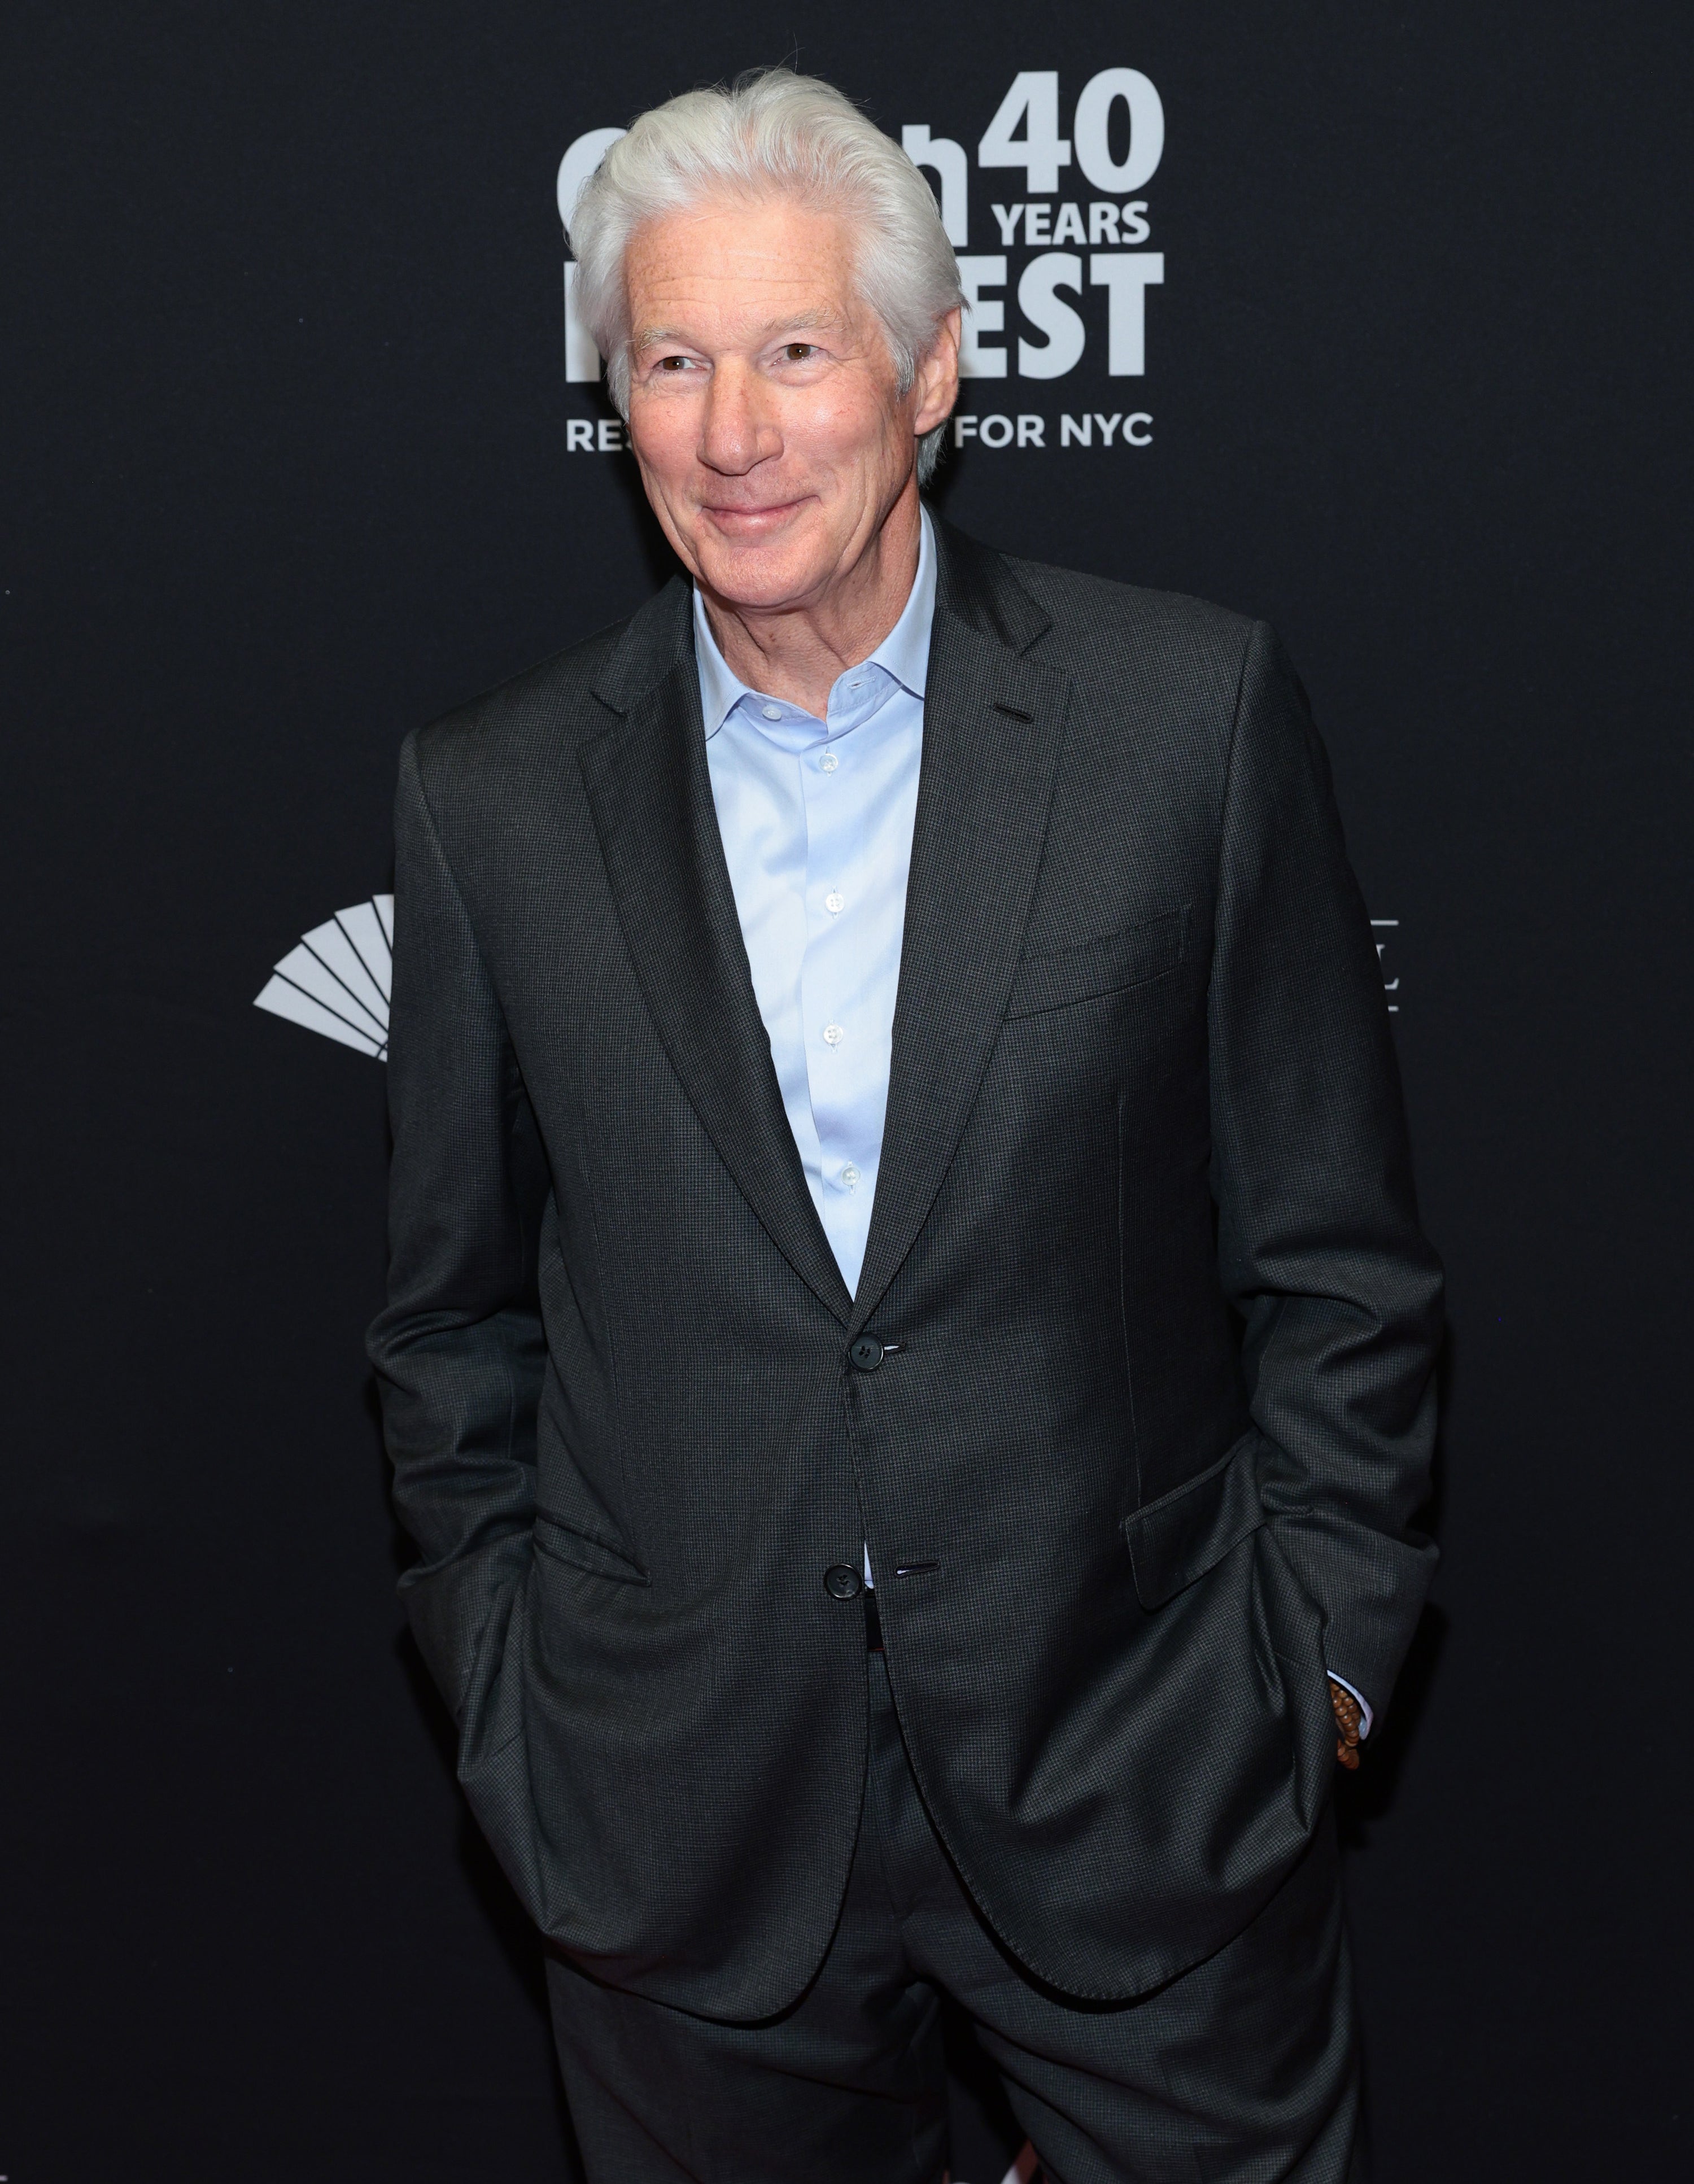 Richard Gere on the red carpet